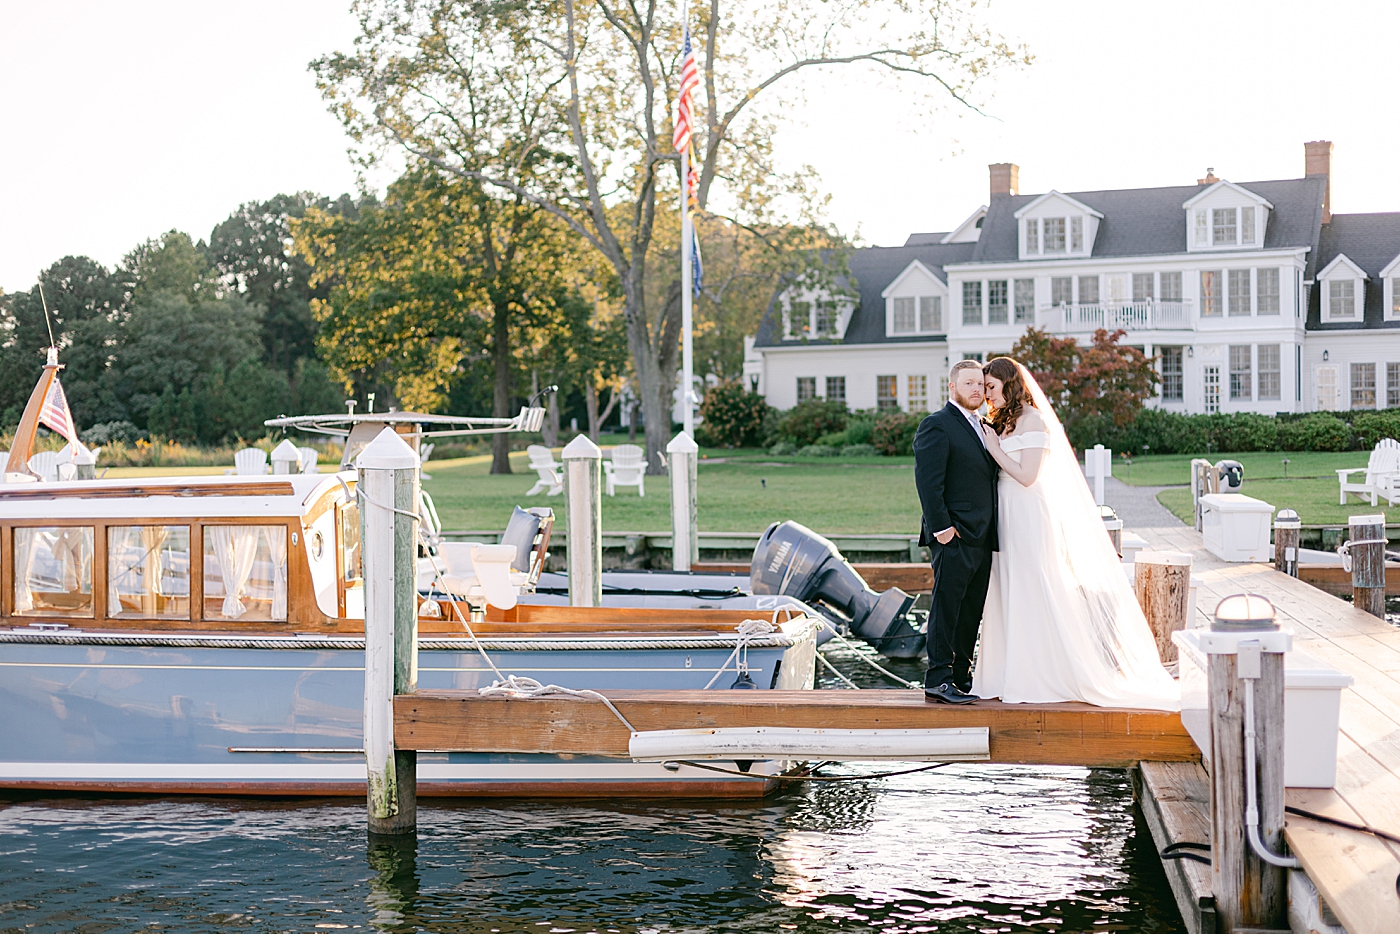 Bride and groom standing together on a dock | Photo by Hope Helmuth Photography